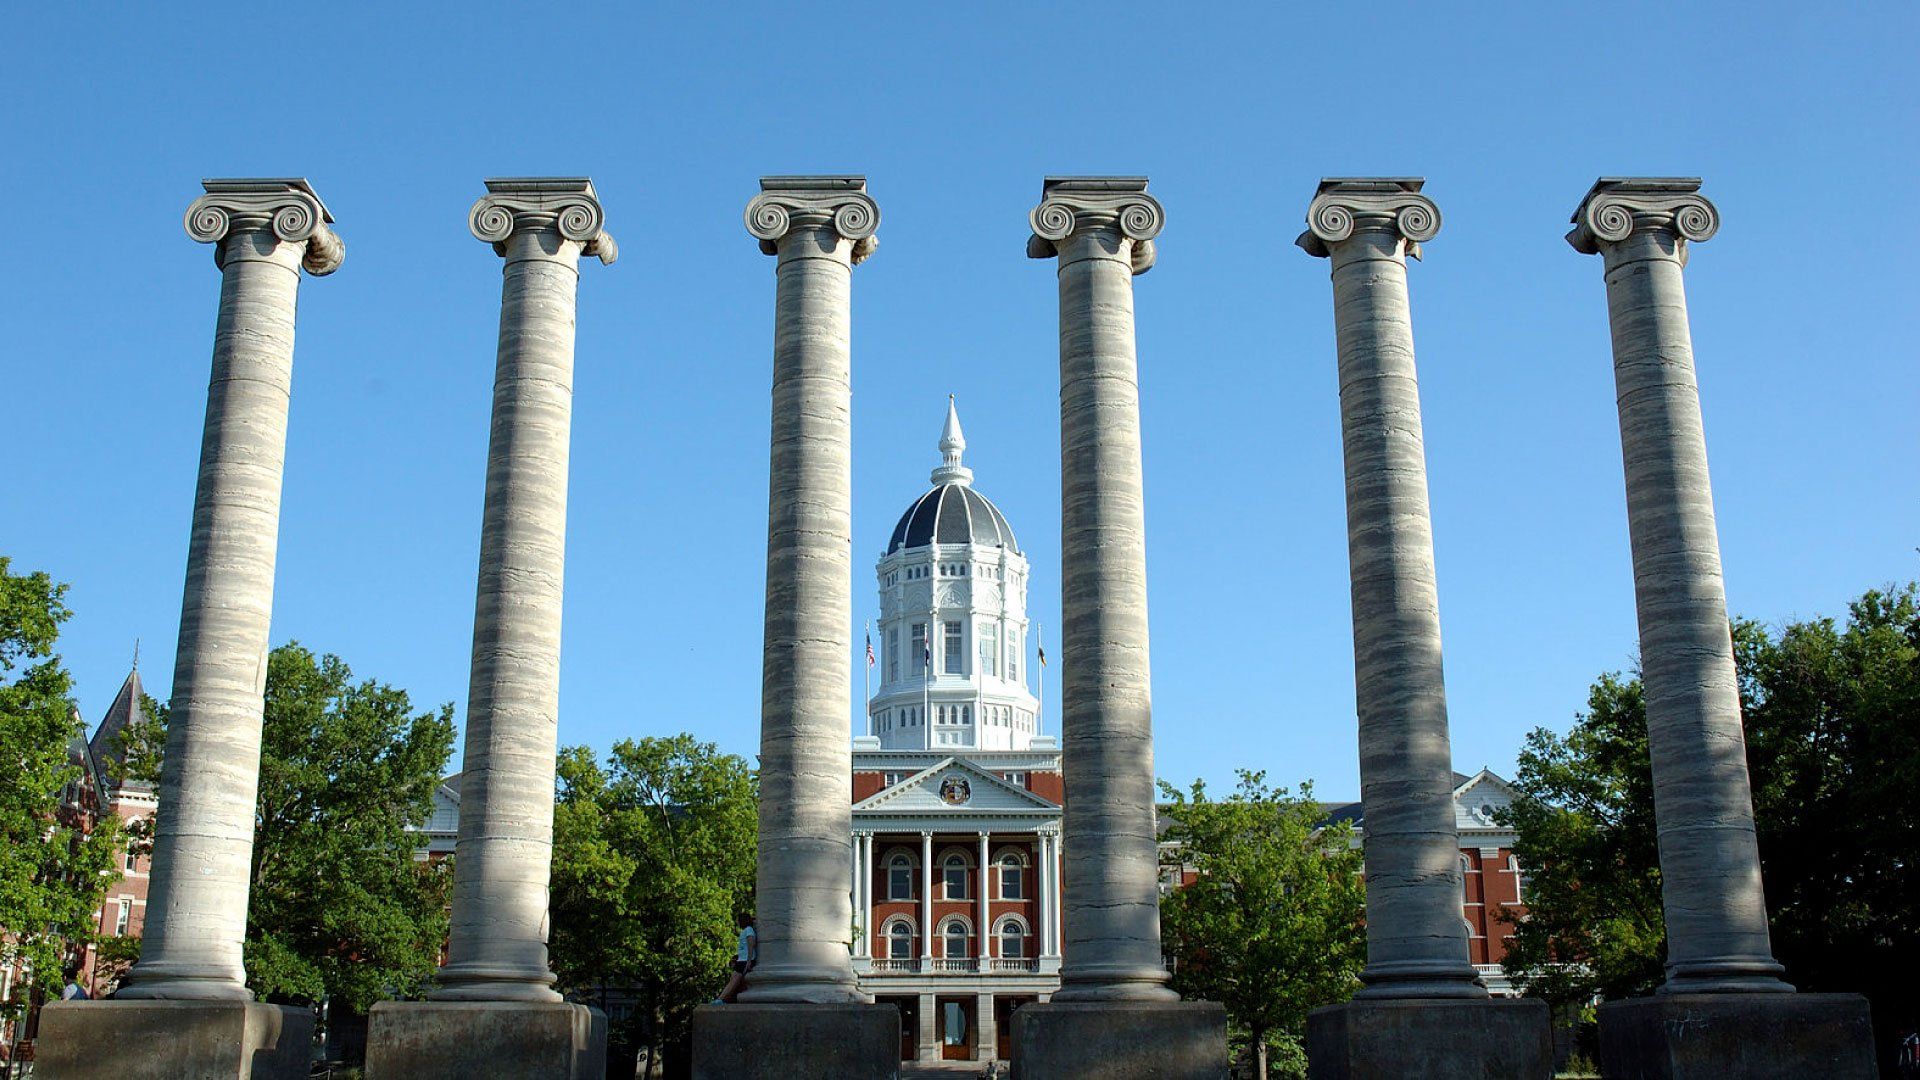 The Famous University of Missouri Columns, Which Is Near The Lofts of Columbia on 9th Street